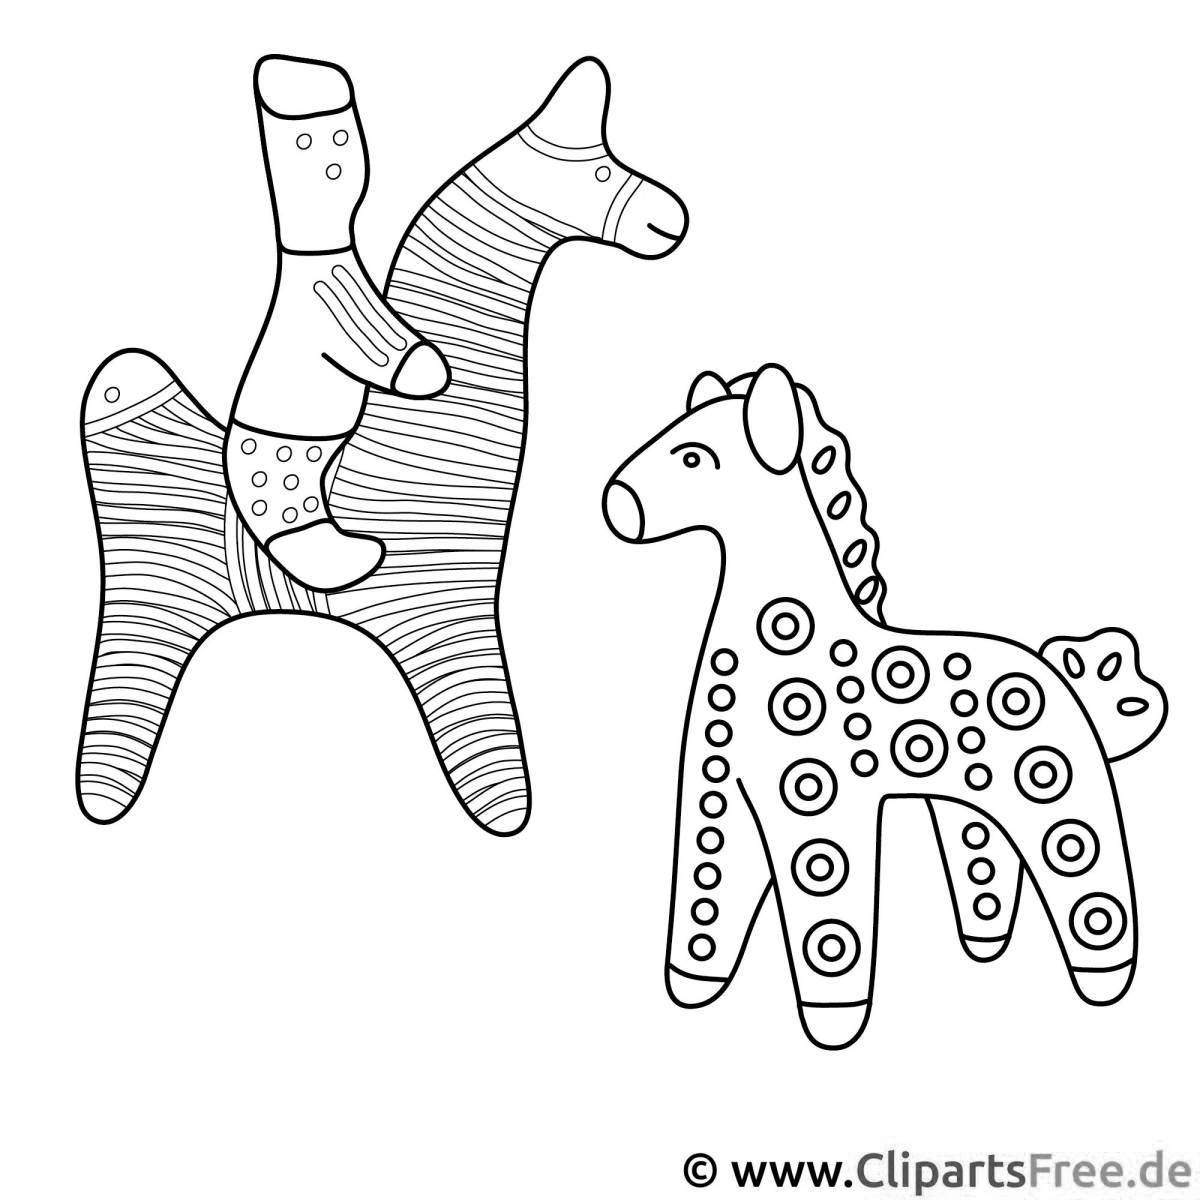 Cute philemon horse coloring for youth